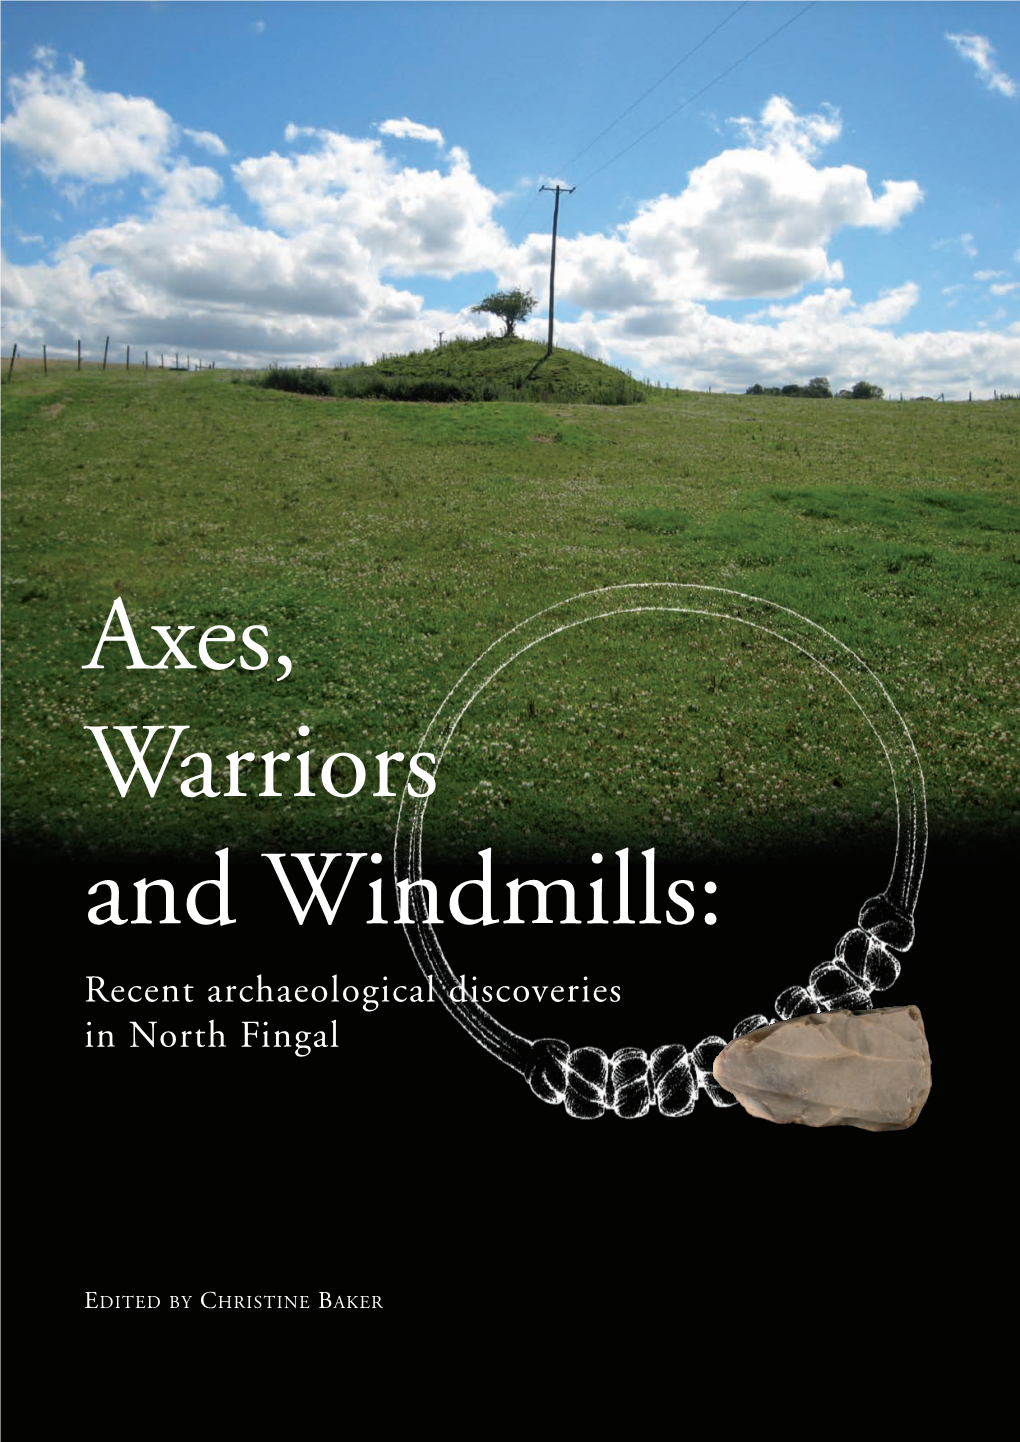 Axes, Warriors and Windmills: Recent Archaeological Discoveries in North Fingal